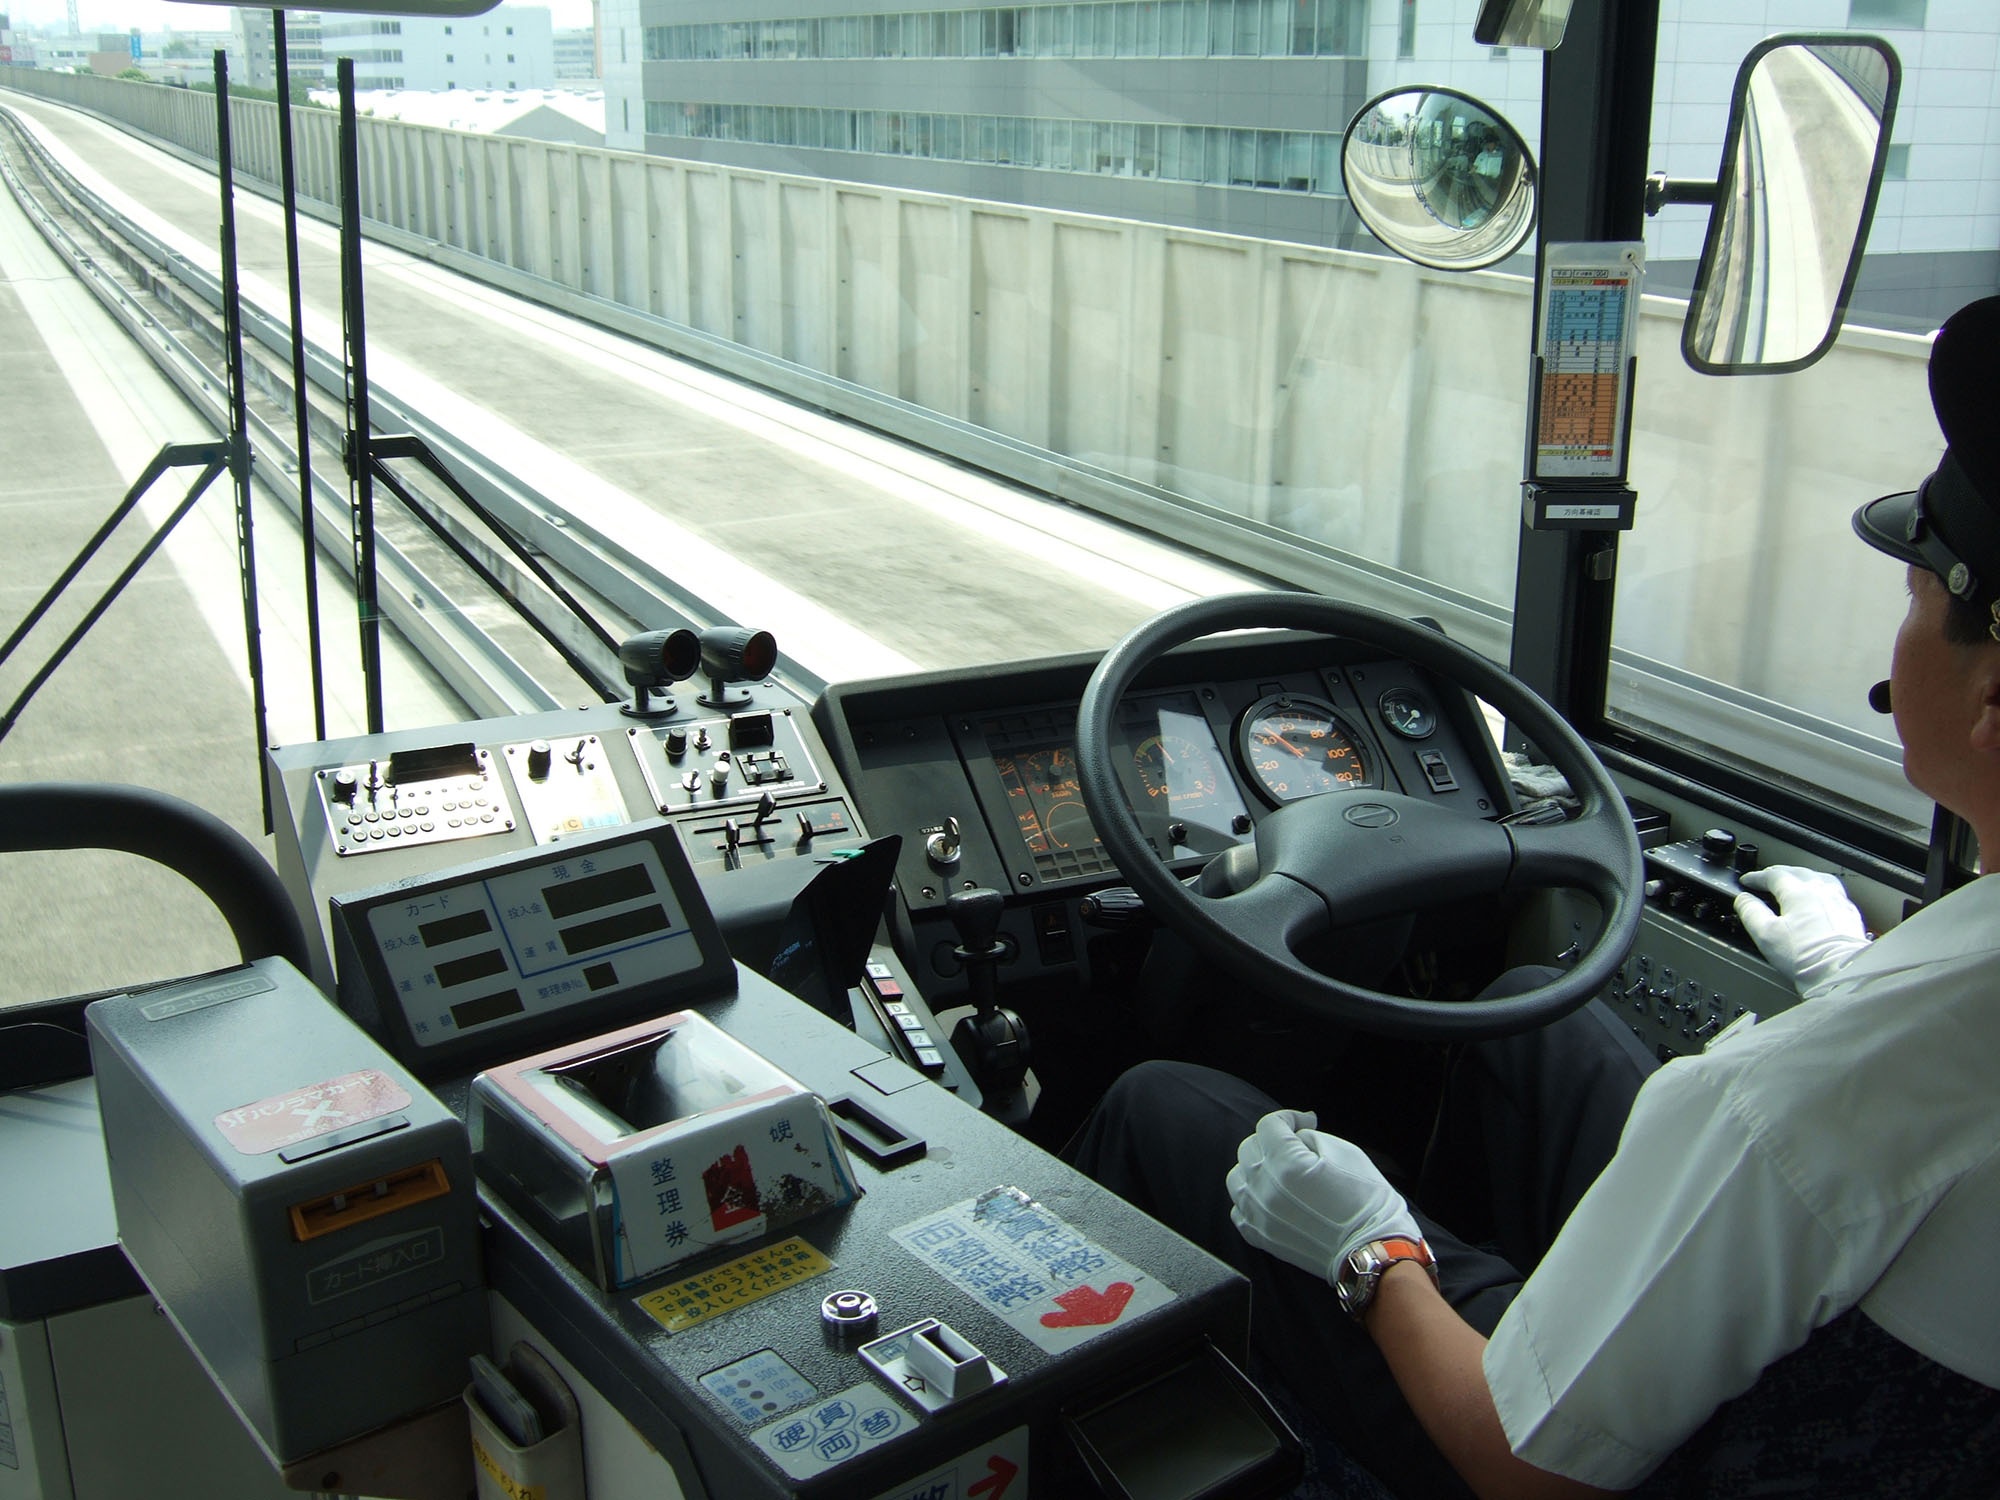 Fig. 22.29 The guideway allows for hands-free driving on the Nagoya-Yutorito Line.